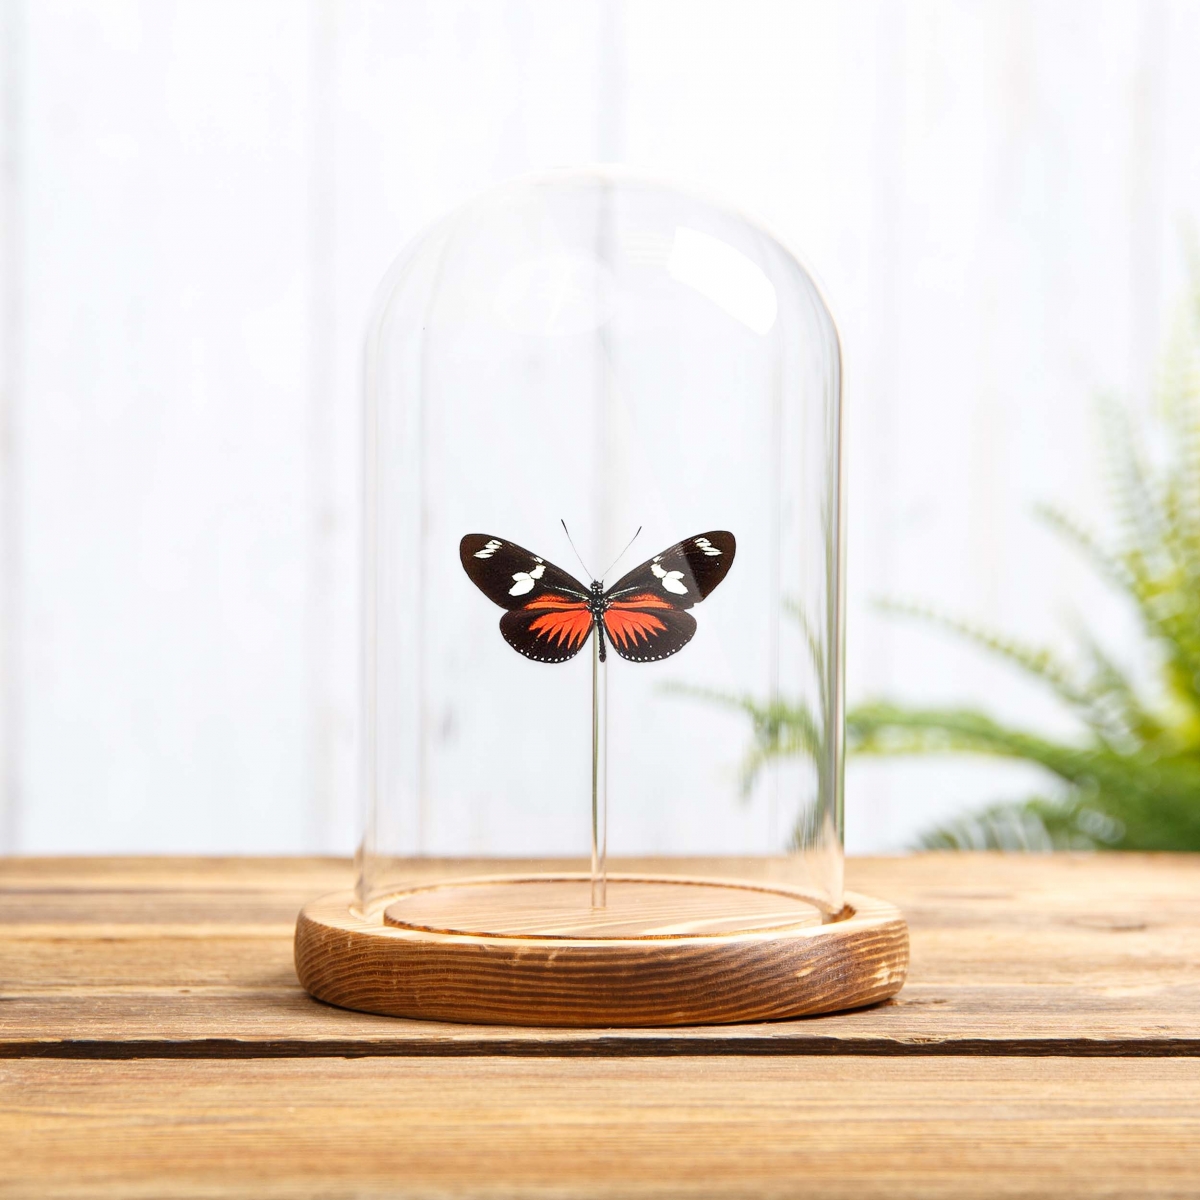 Doris Longwing in Glass Dome with Wooden Base (Heliconius doris)